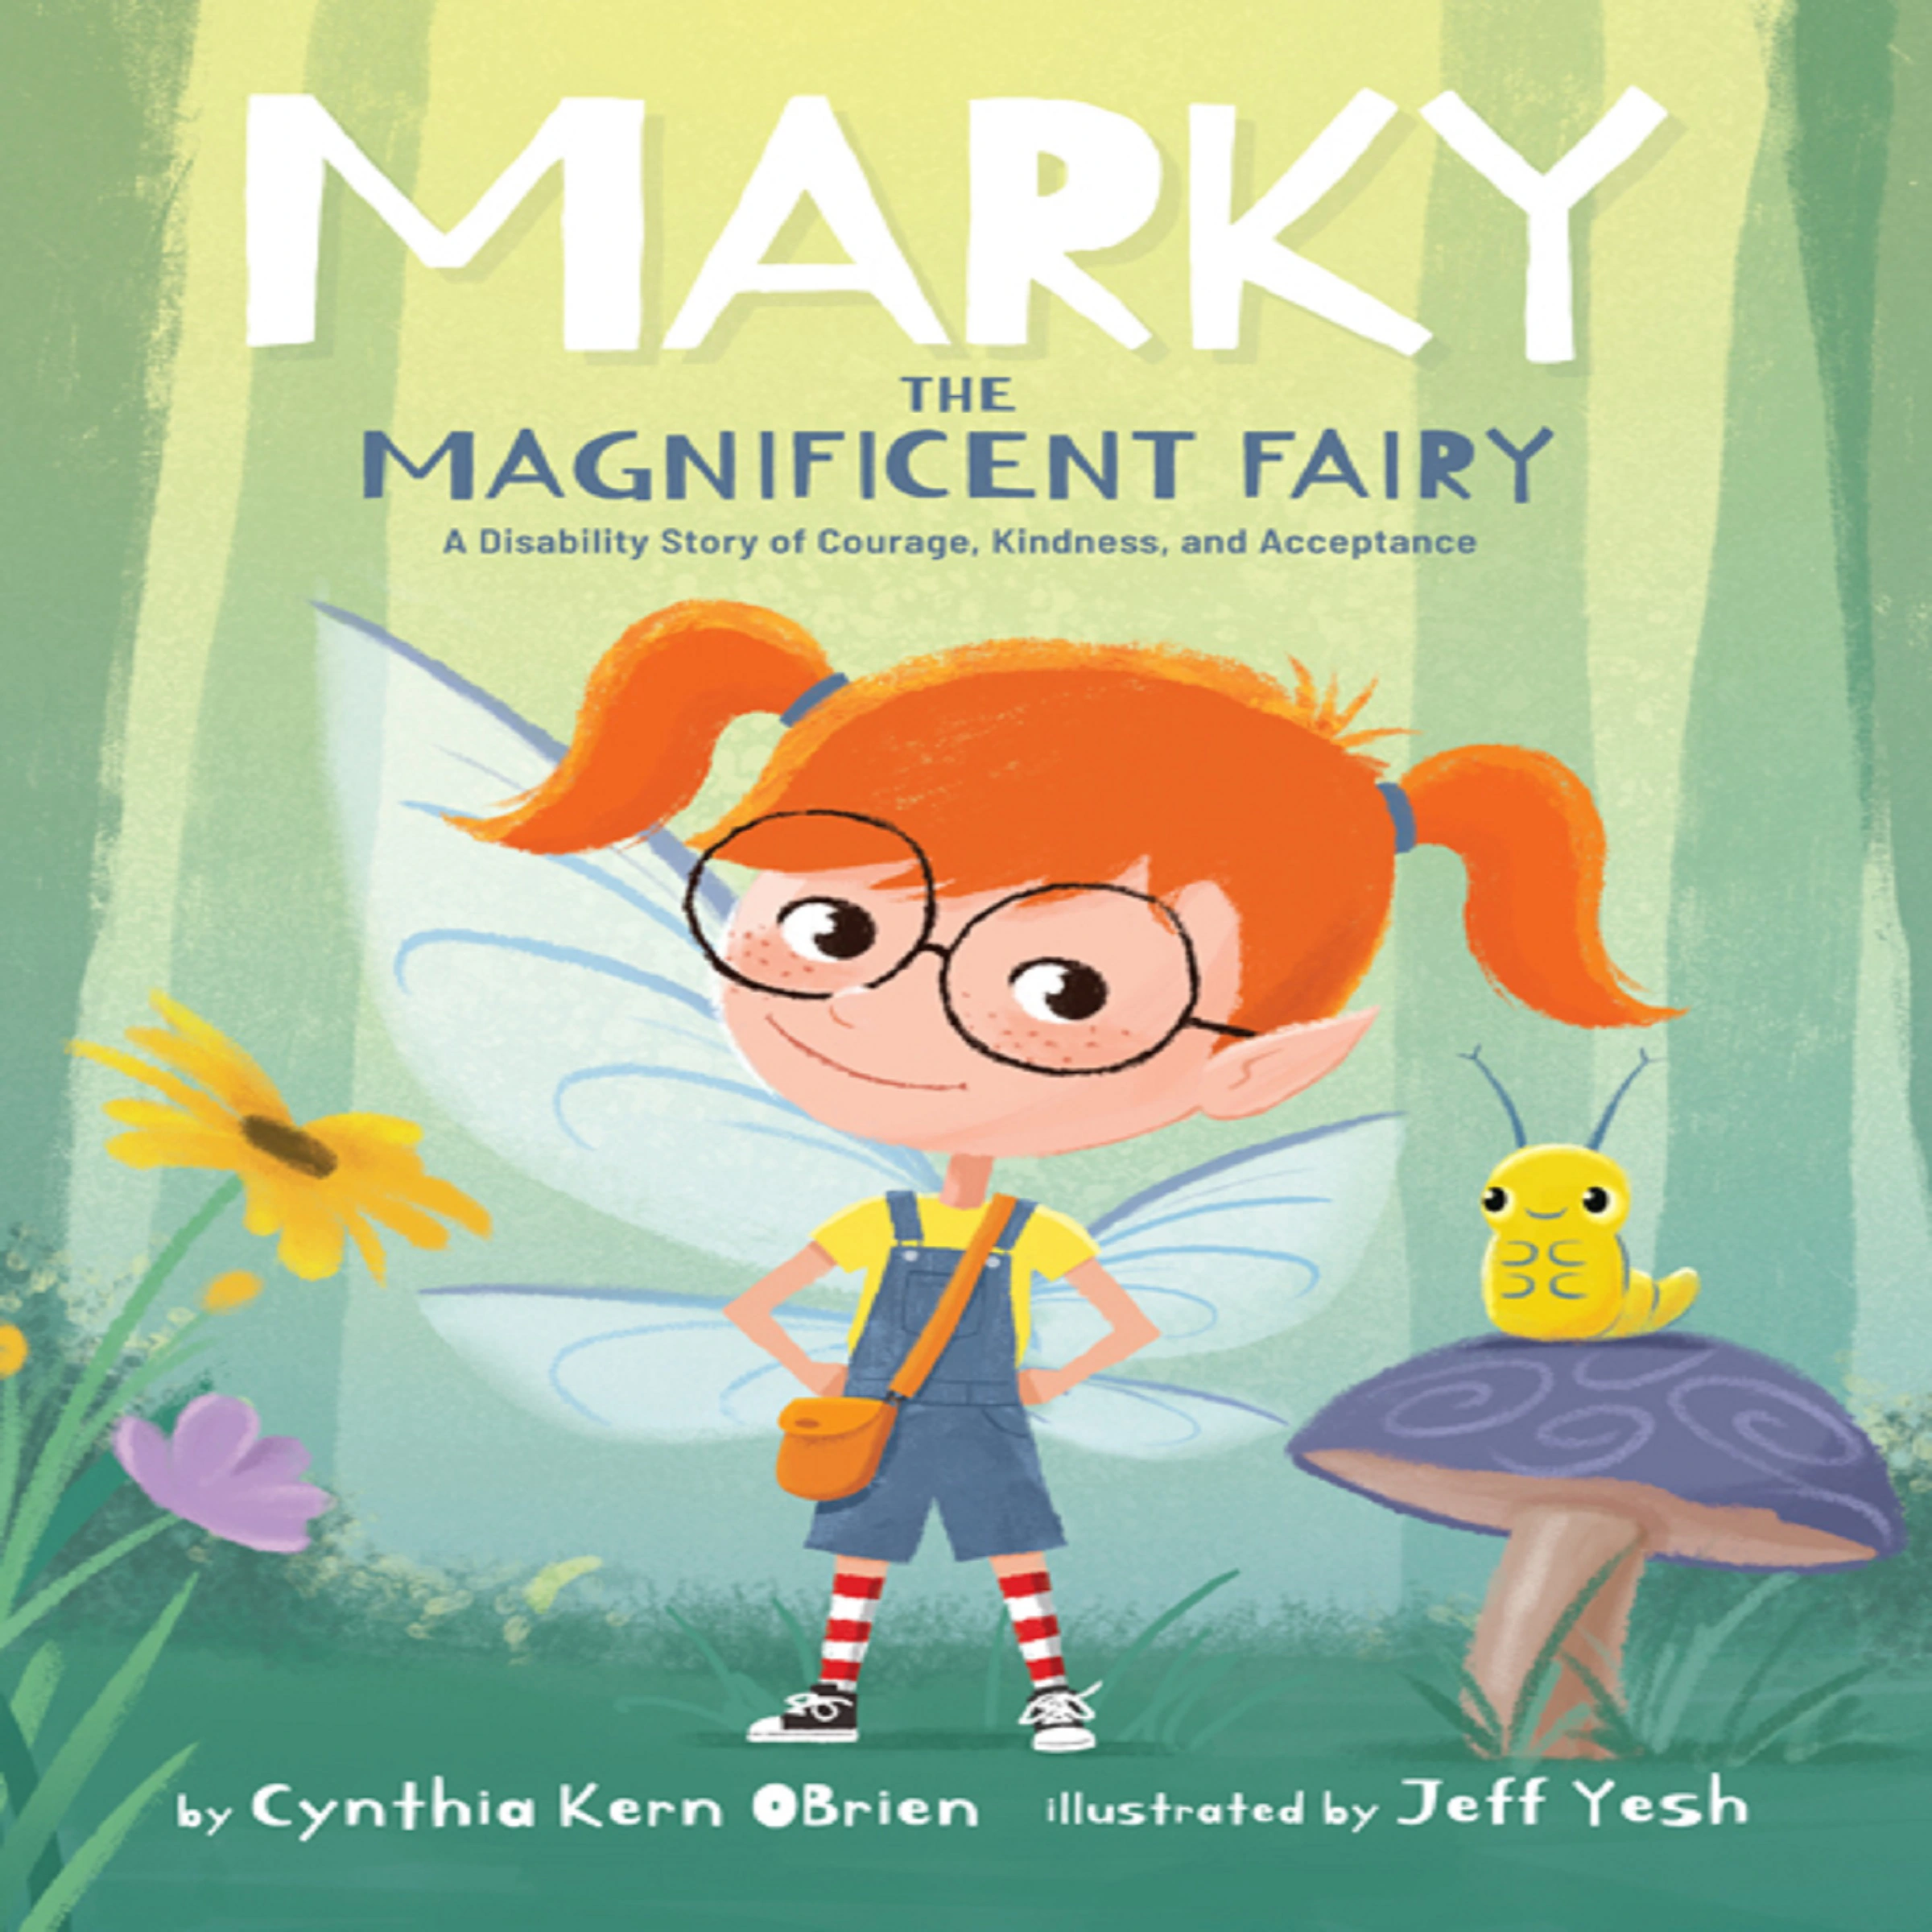 Marky the Magnificent Fairy: A Disability Story of Courage, Kindness, and Acceptance Audiobook by Cynthia Kern Obrien